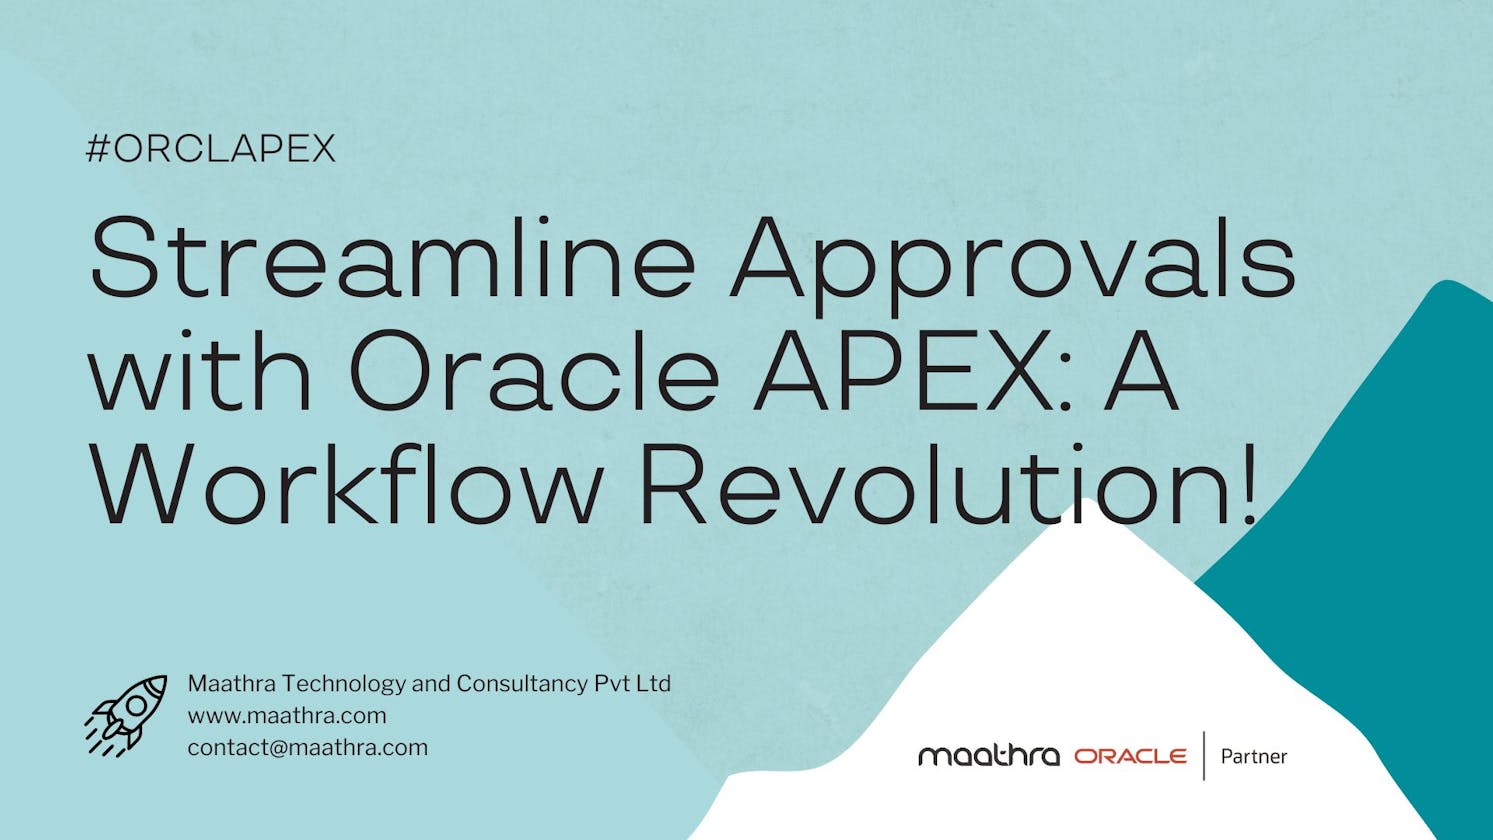 Oracle APEX Use Cases: Streamline Approvals